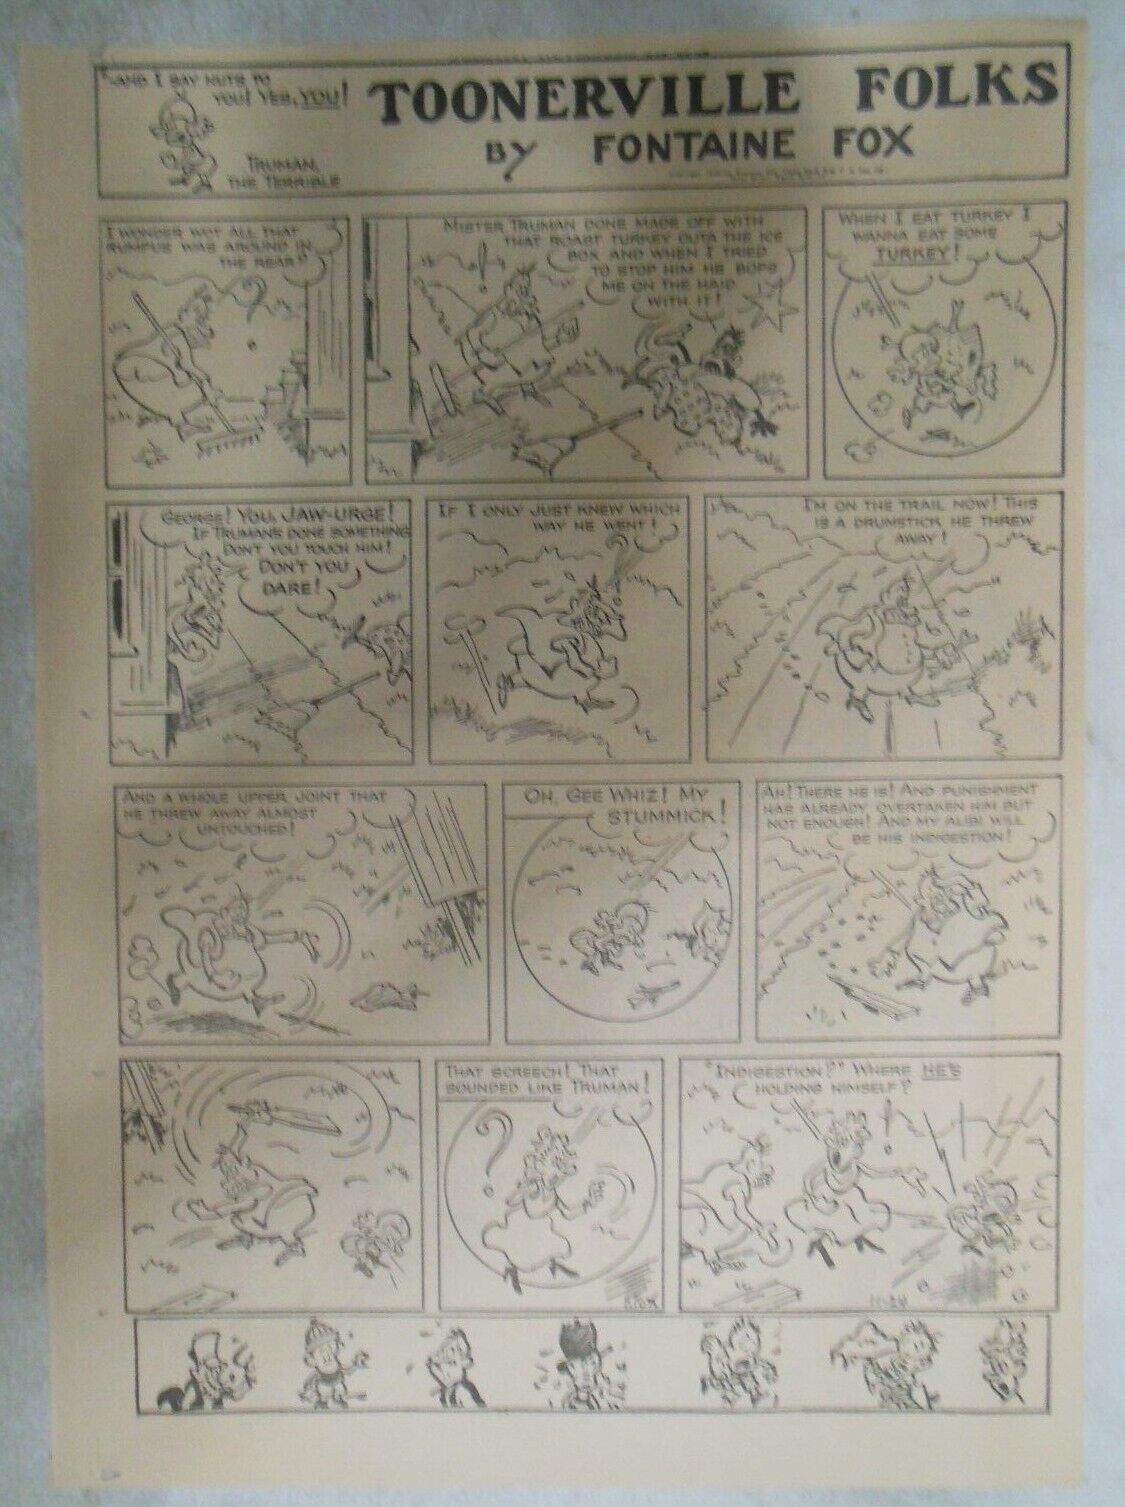 Toonerville Folks by Fontaine Fox from 11/24/1940 Tabloid Page Size